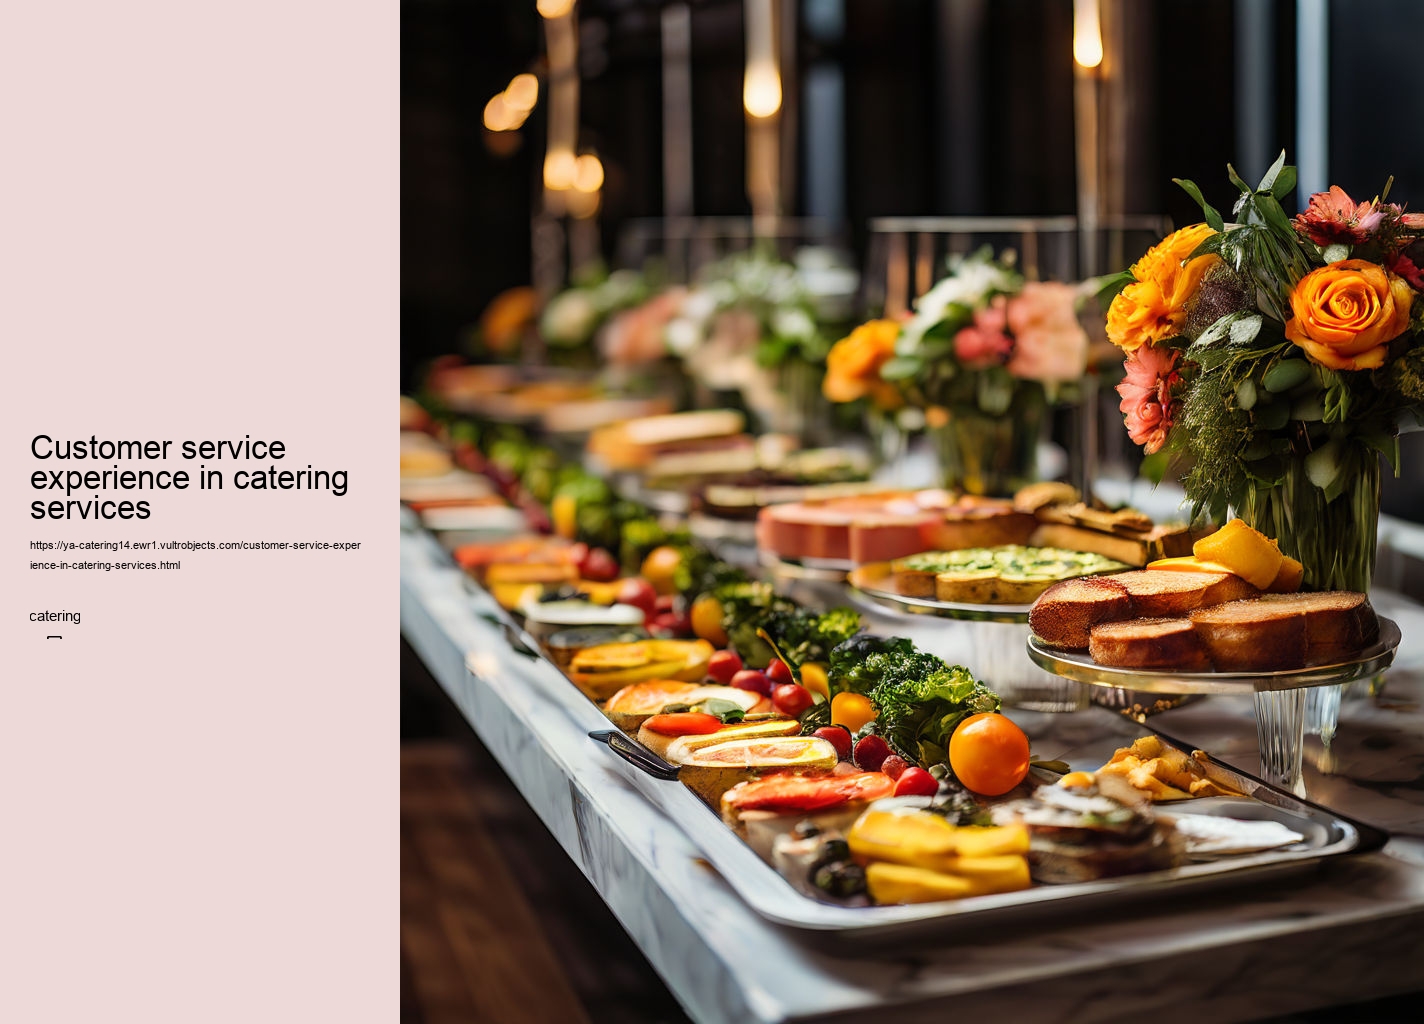 Customer service experience in catering services